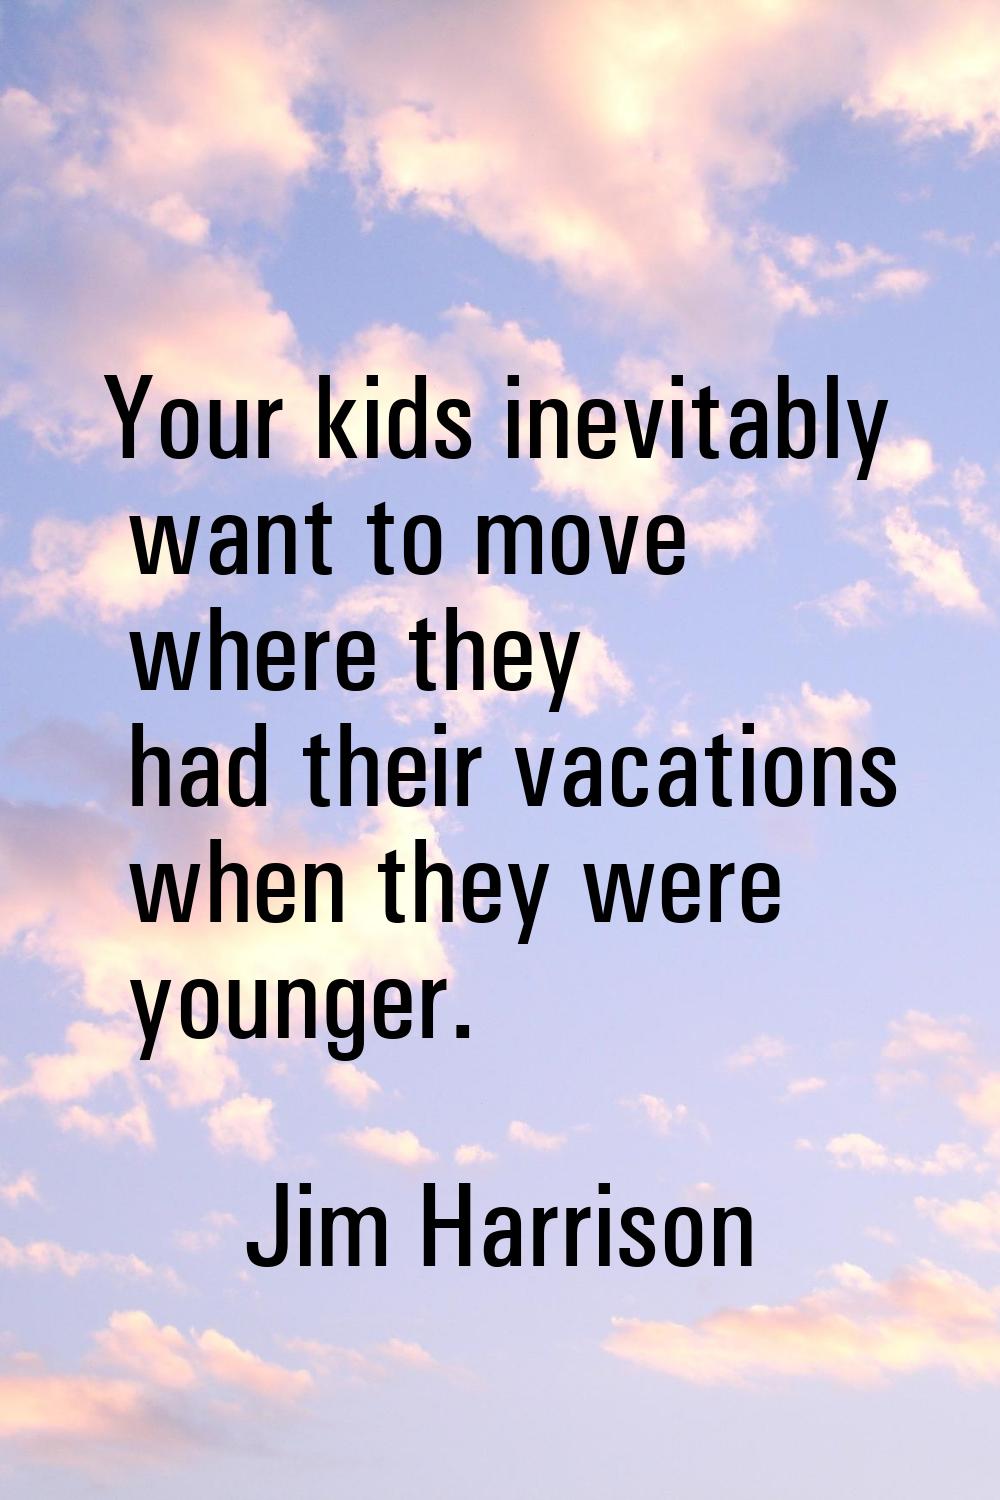 Your kids inevitably want to move where they had their vacations when they were younger.